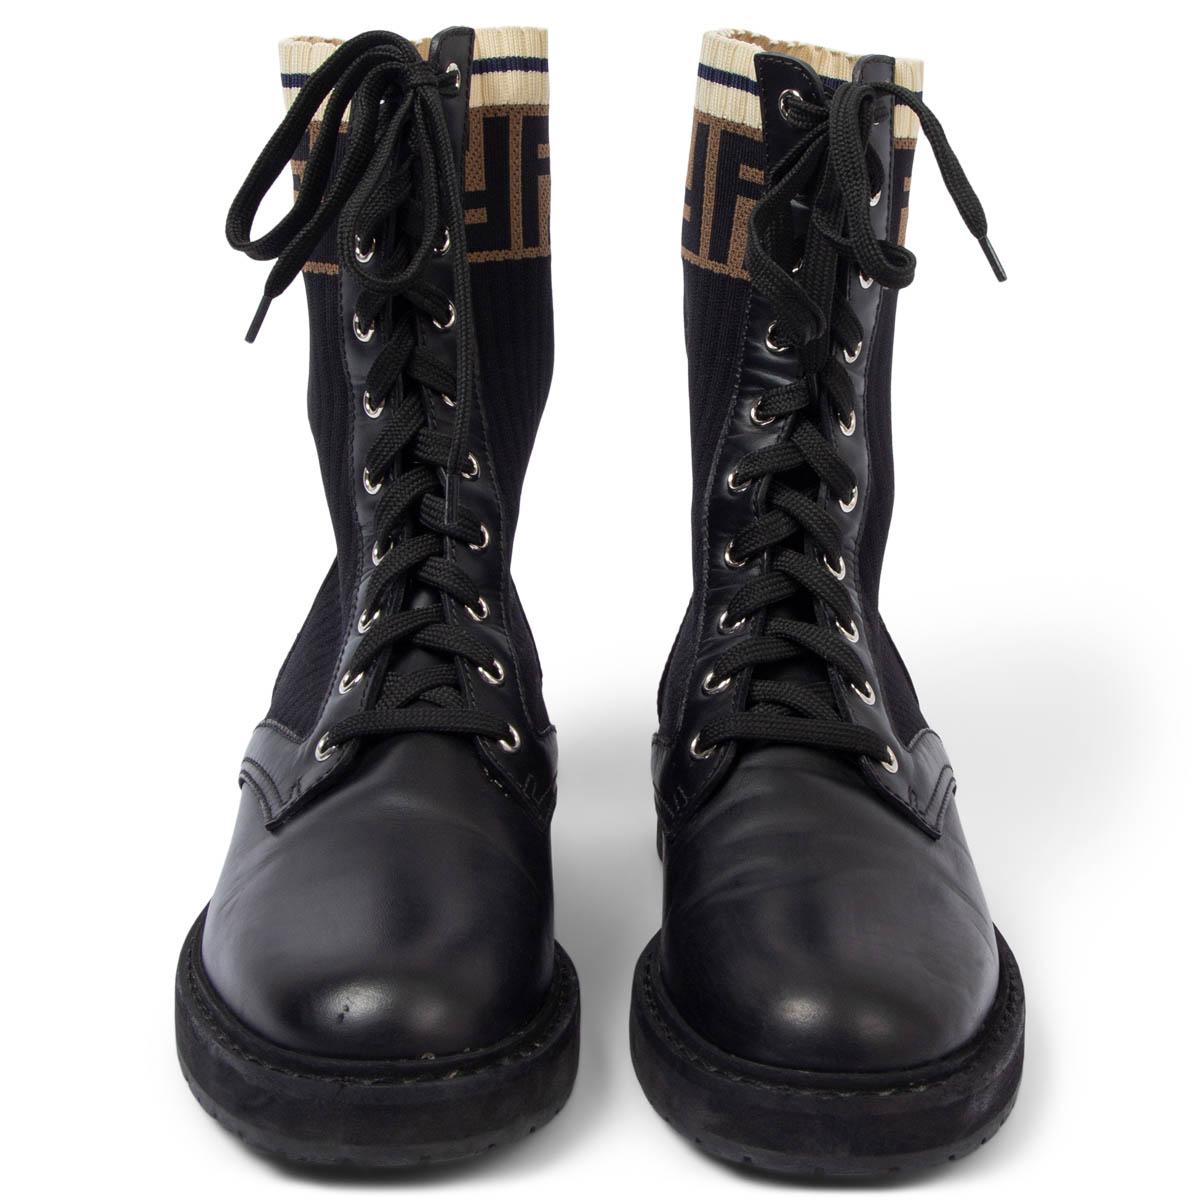 100% authentic Fendi Rockoko combat boots in black calfskin and technical fabric with Zucca trim. Have been worn and are in excellent condition. 

Measurements
Imprinted Size	37.5
Shoe Size	37.5
Inside Sole	24.5cm (9.6in)
Width	7.5cm